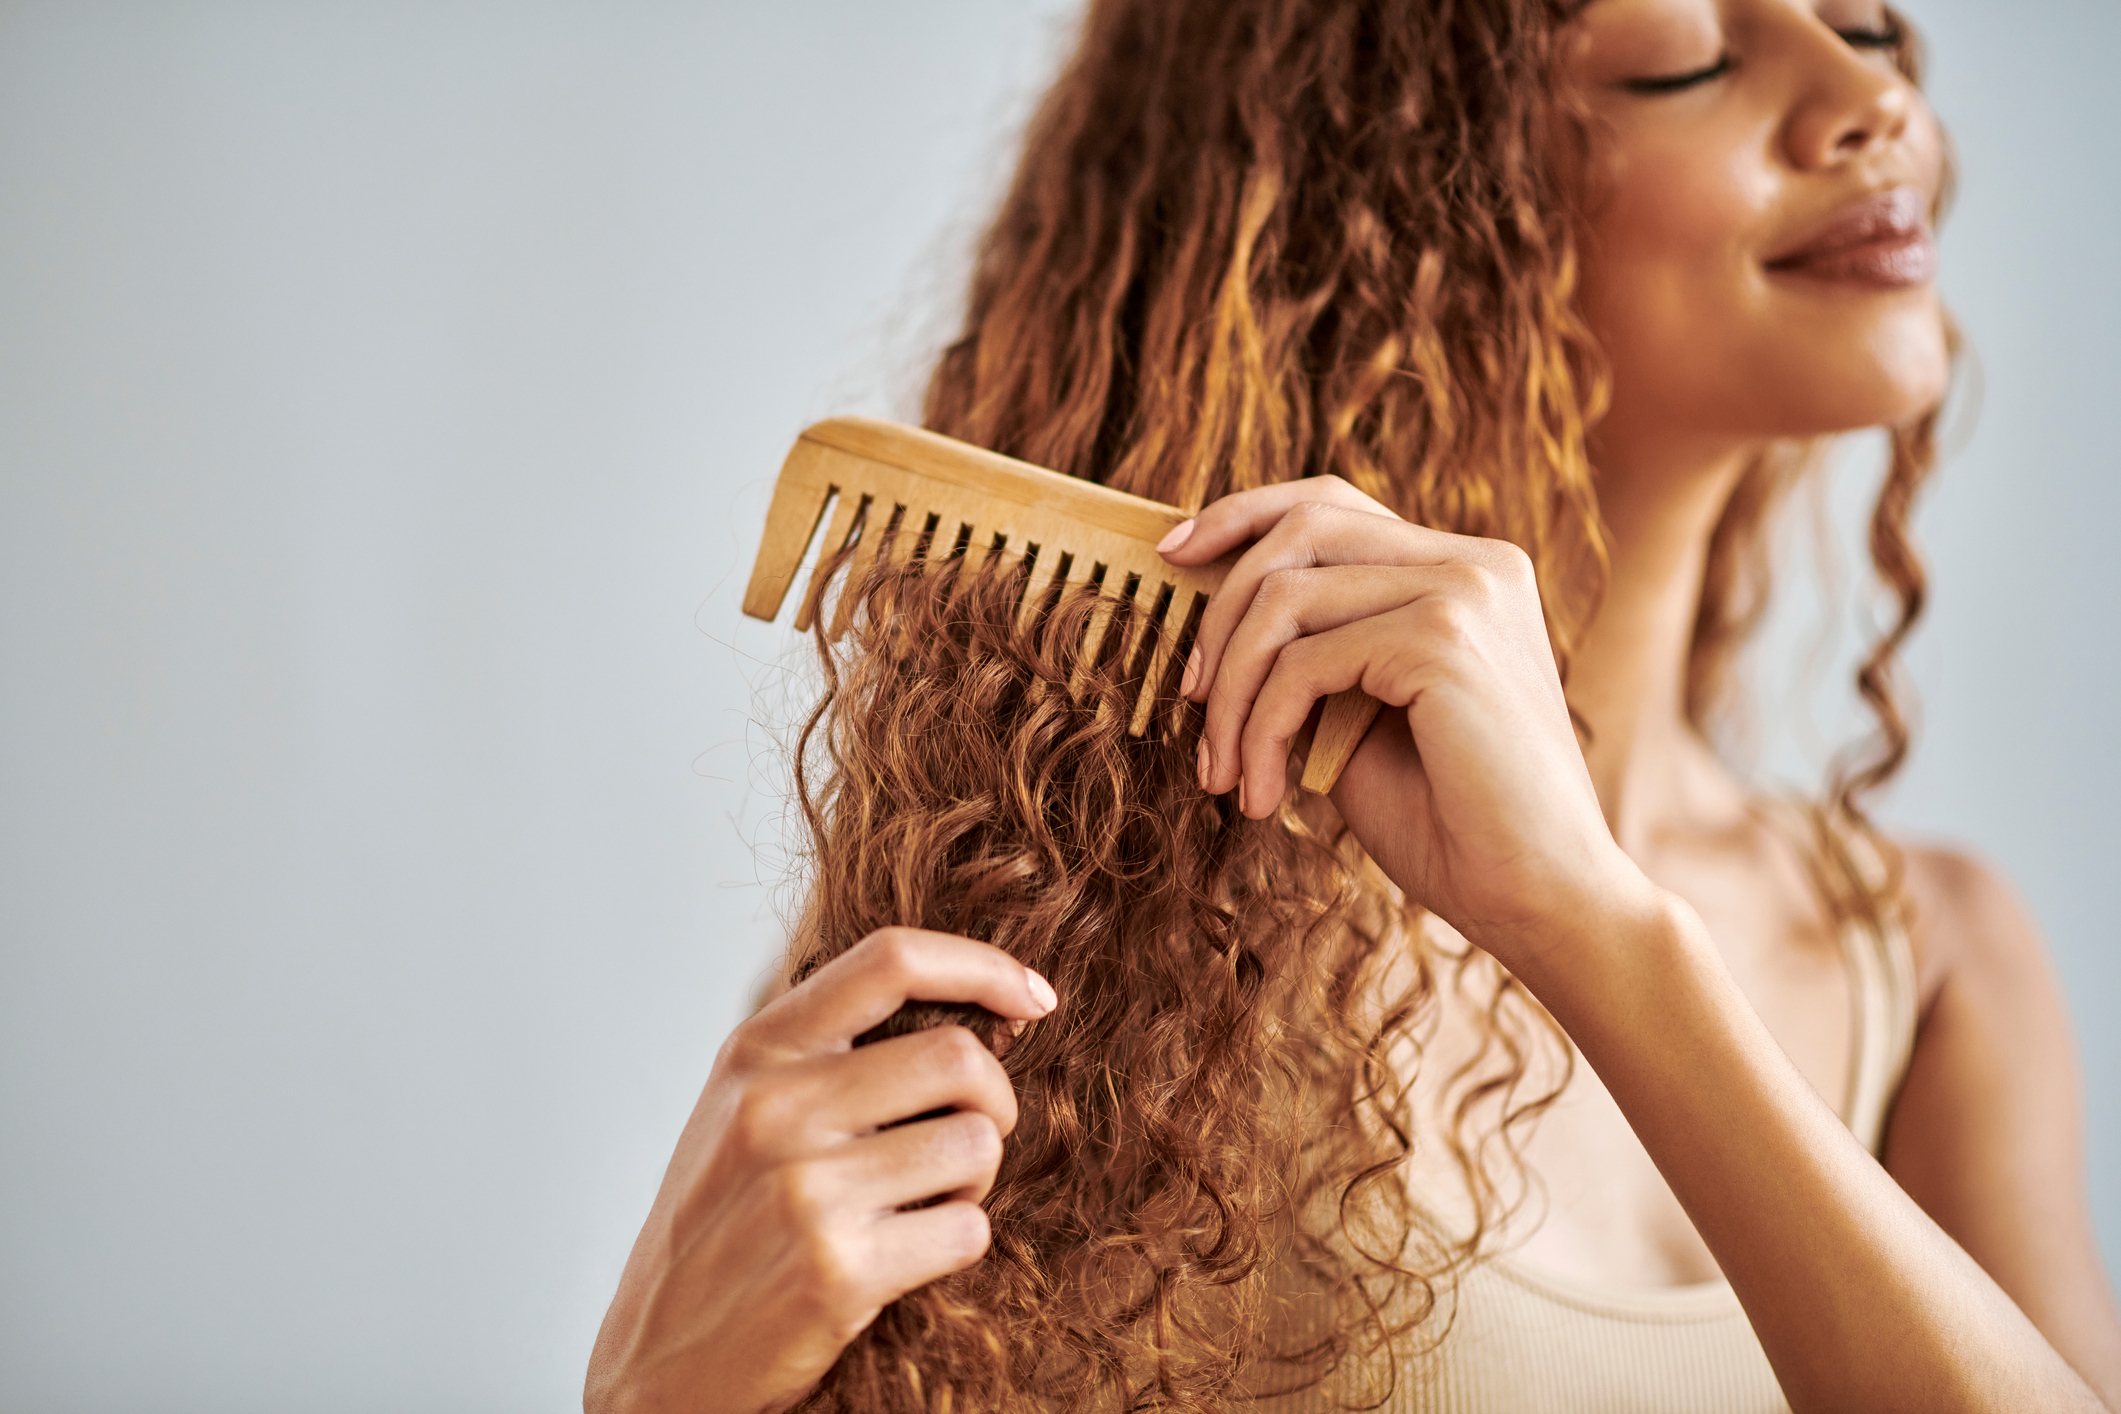 Woman combs her curly hair with a wooden comb, smiling with eyes closed in a serene moment